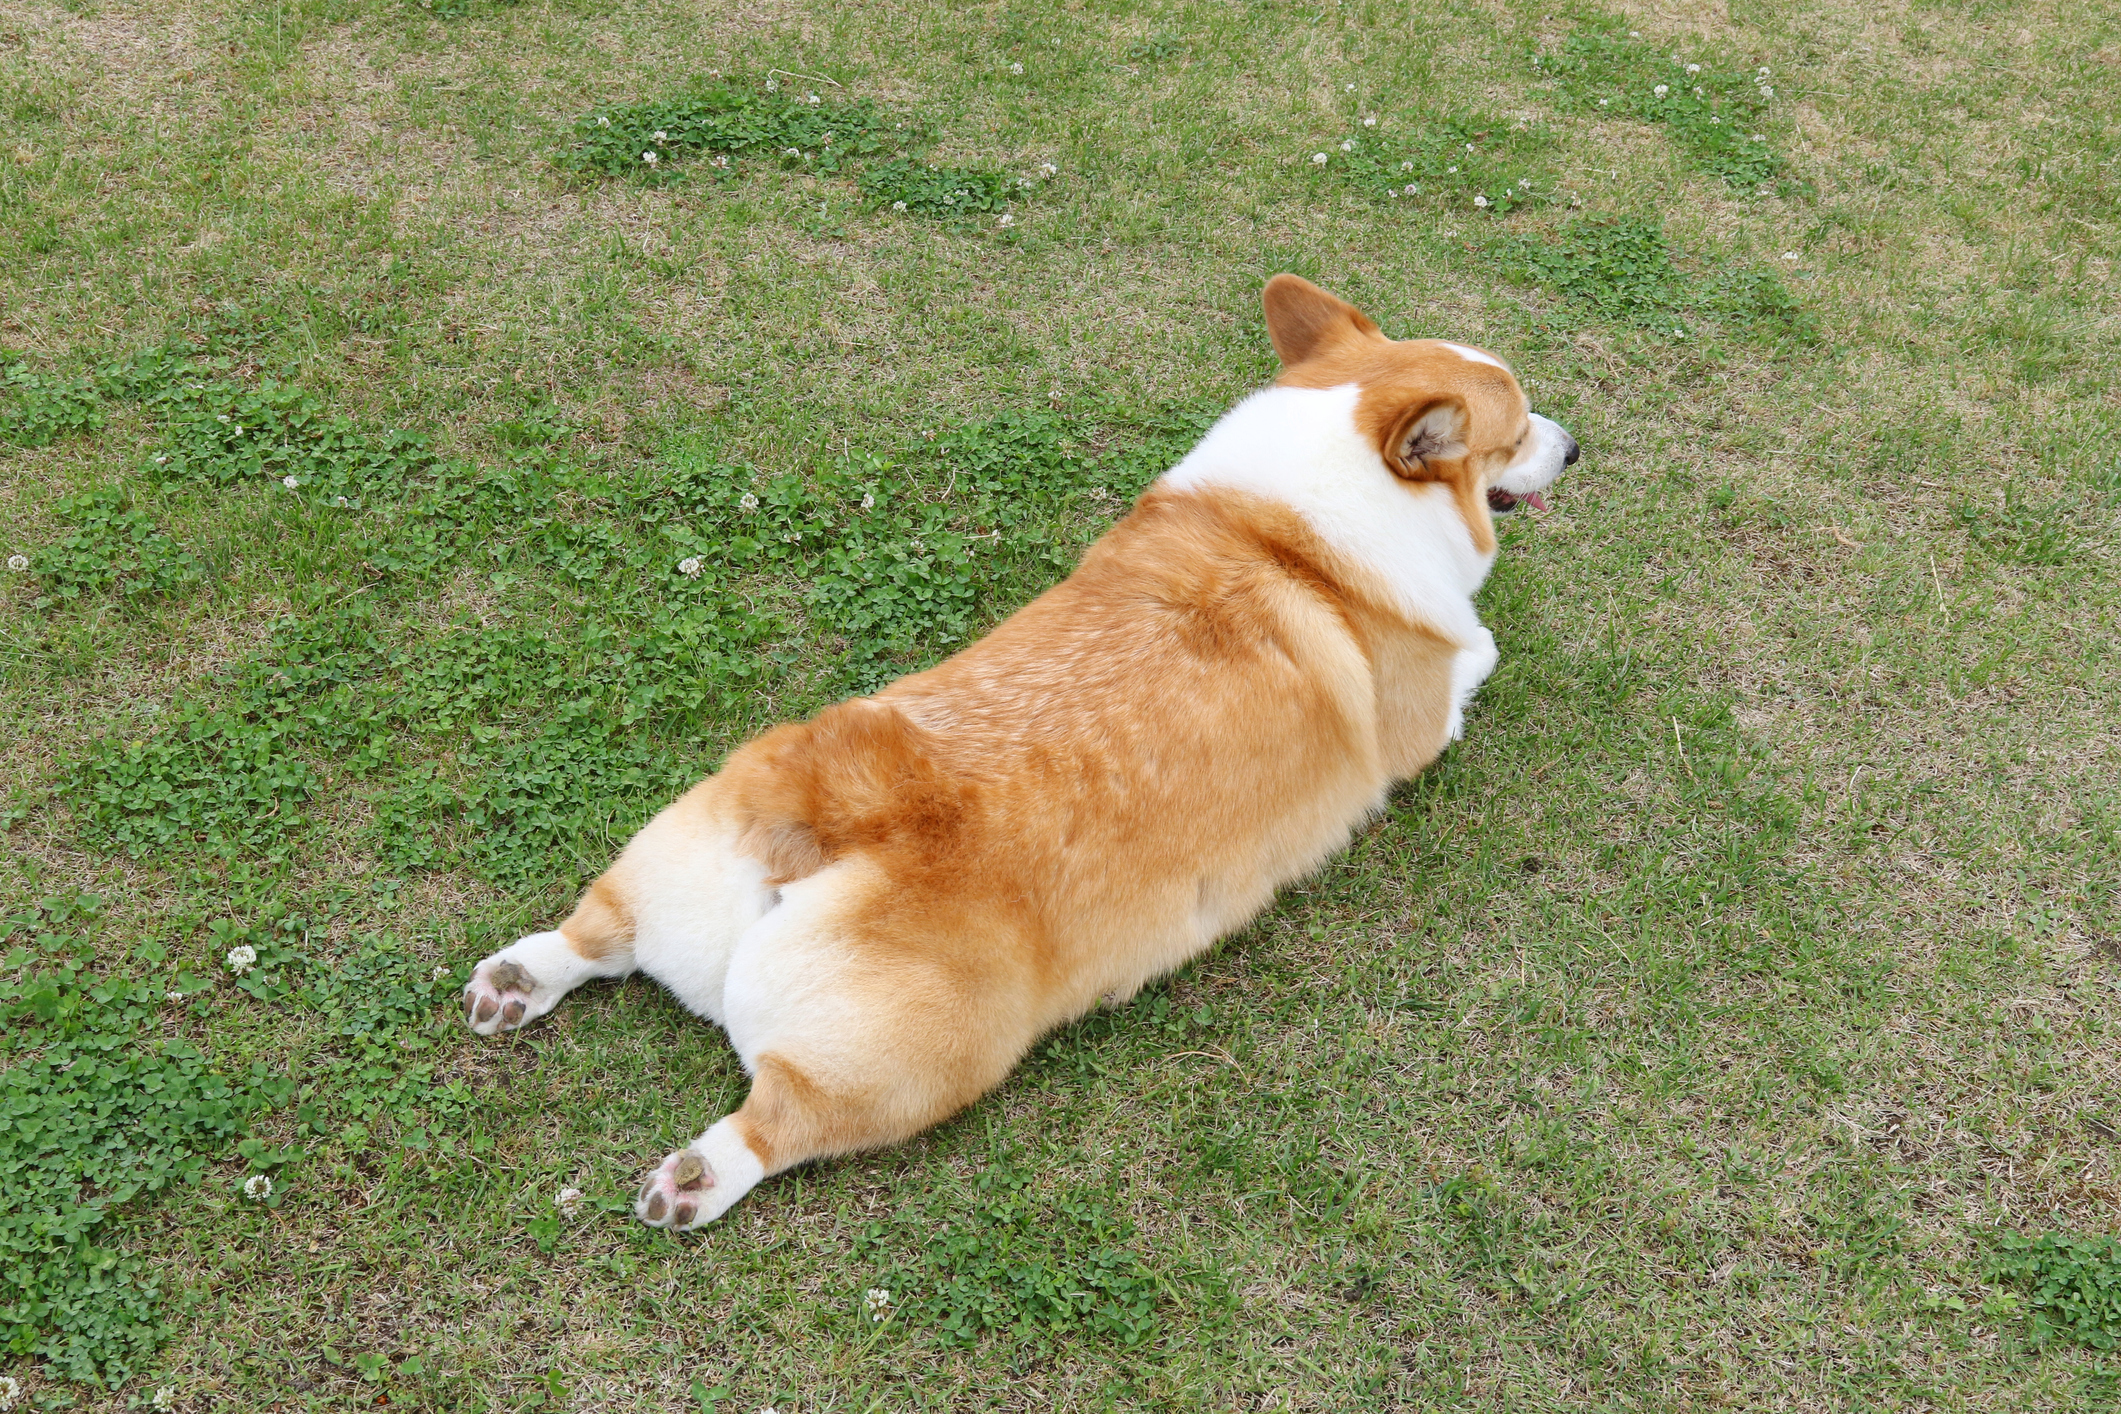 A tan and white Pembroke Welsh Corgi laying in the grass in the sploot position with legs stretched out behind him